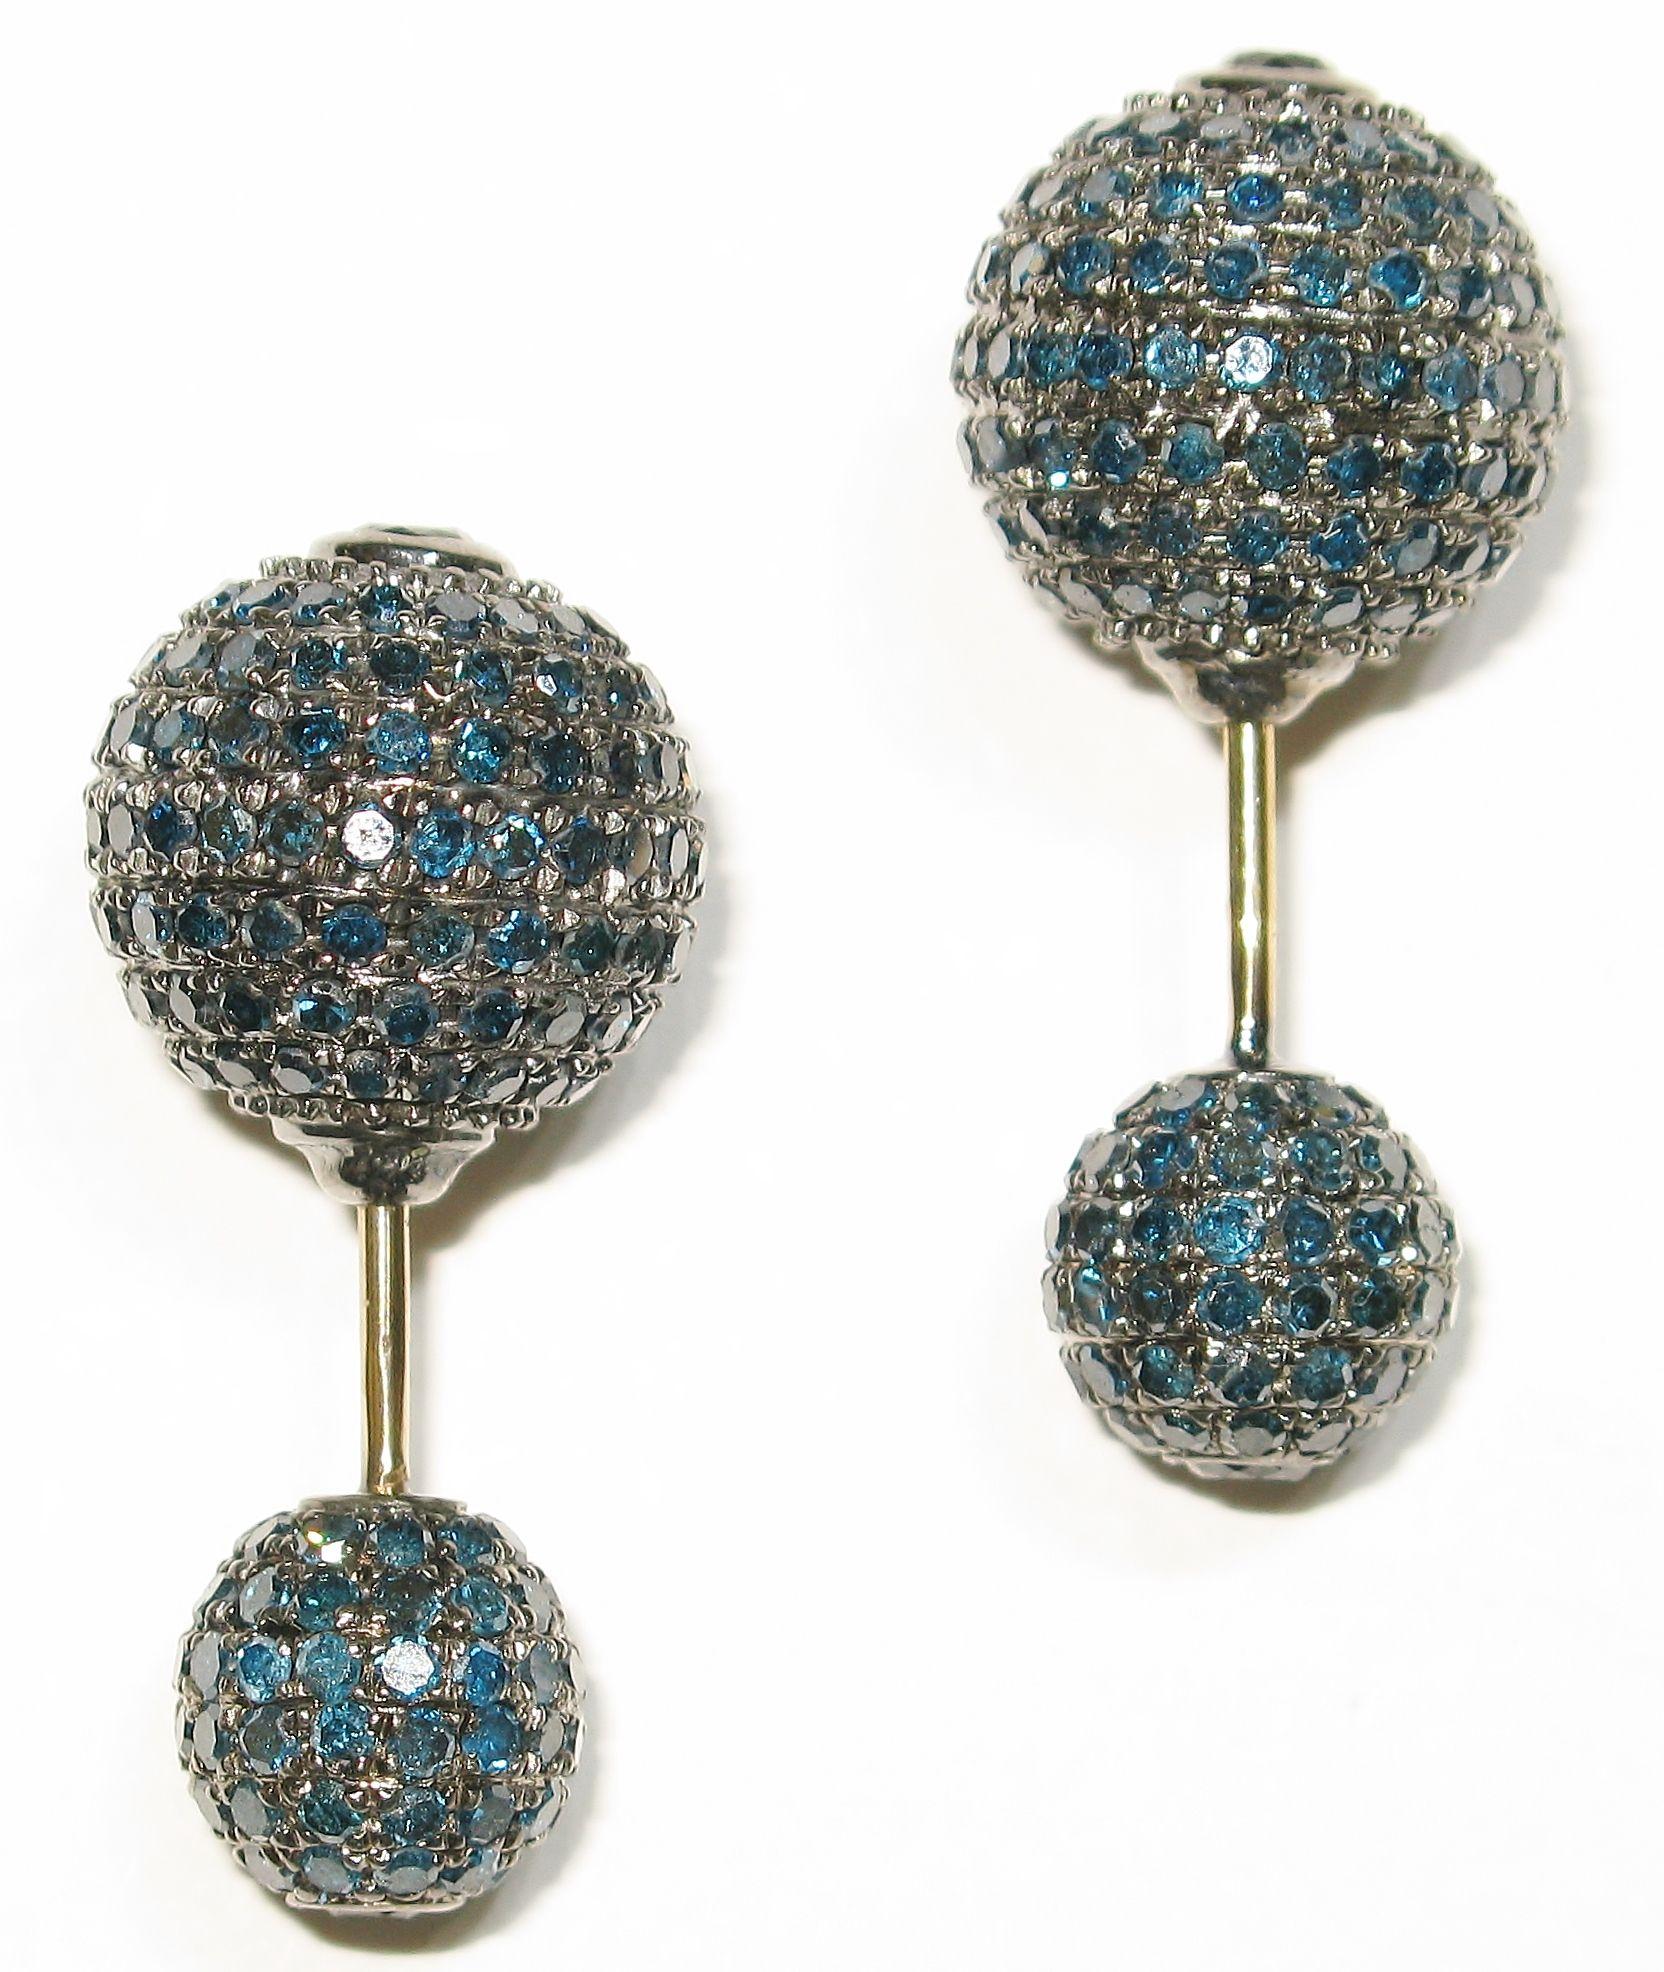 Blue Pave Diamond Ball Earrings Made in 18k Gold & Silver In New Condition For Sale In New York, NY